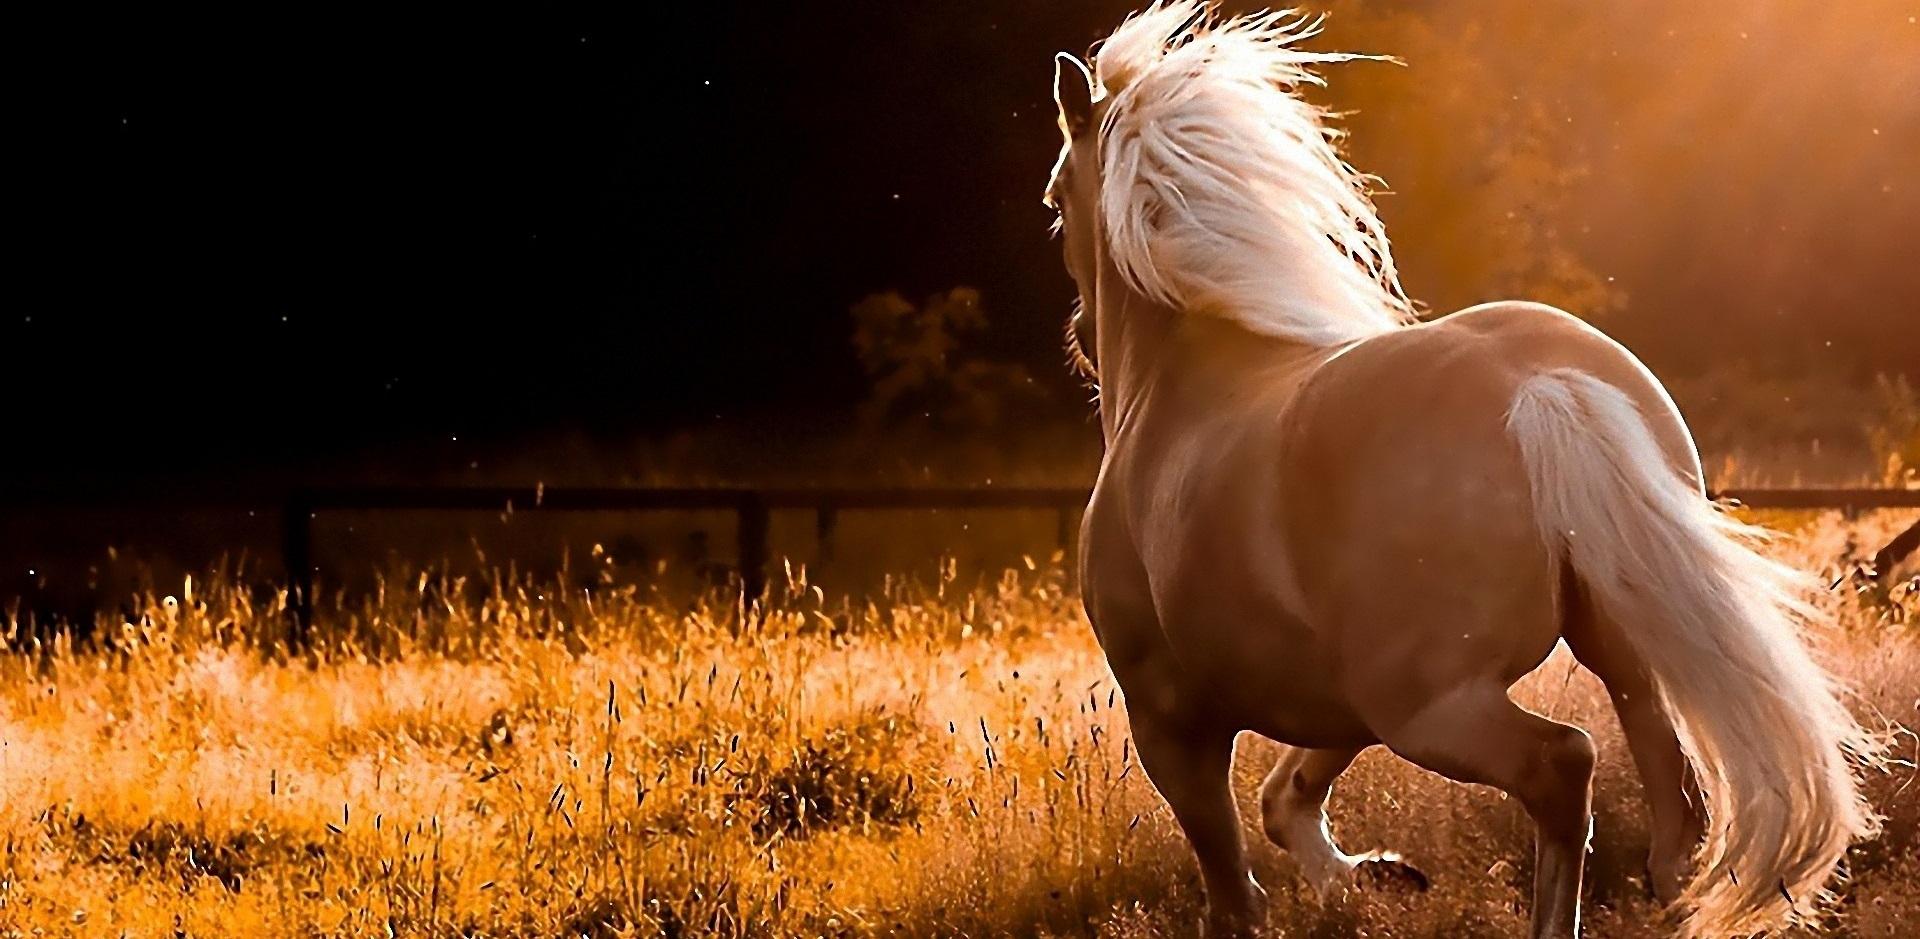 Horse Wallpaper and Background Image